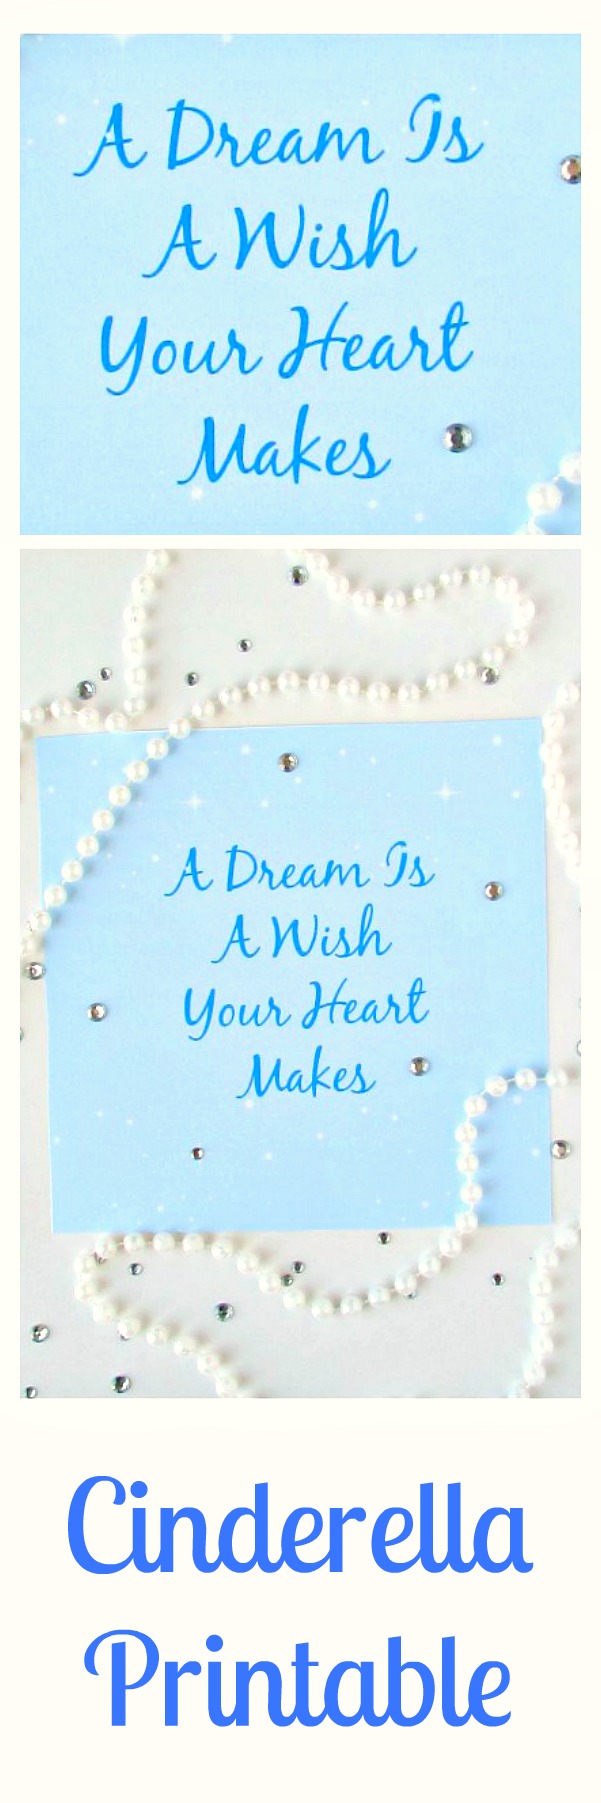 Cinderella Printable- A dream is a wish your heart makes